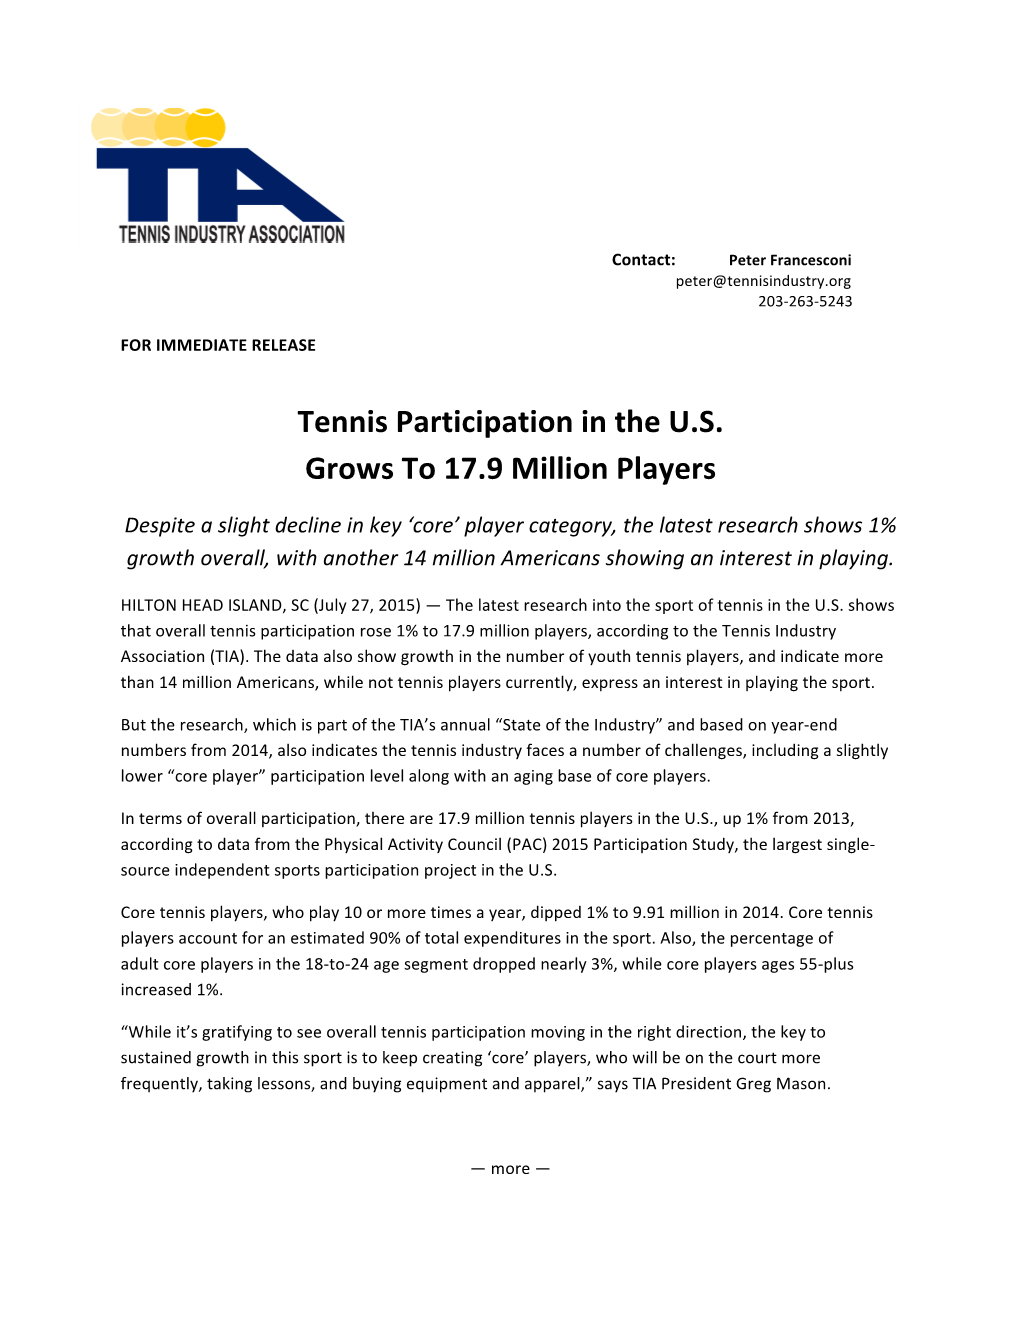 Tennis Participation in the U.S. Grows to 17.9 Million Players